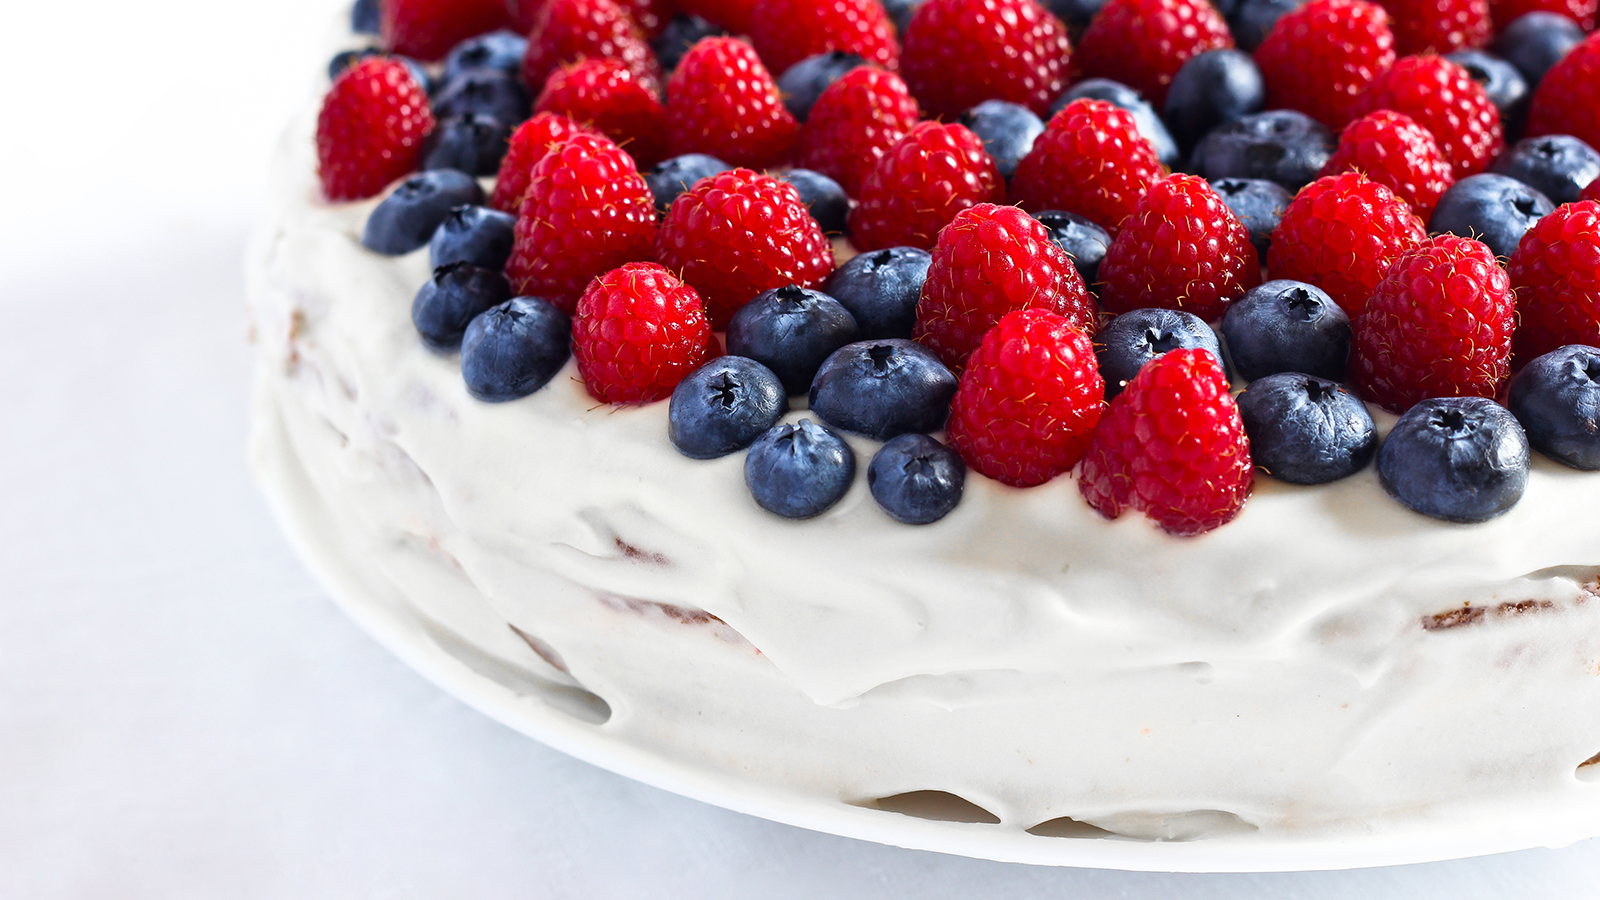 Creamy sweet cake with blueberries and raspberries